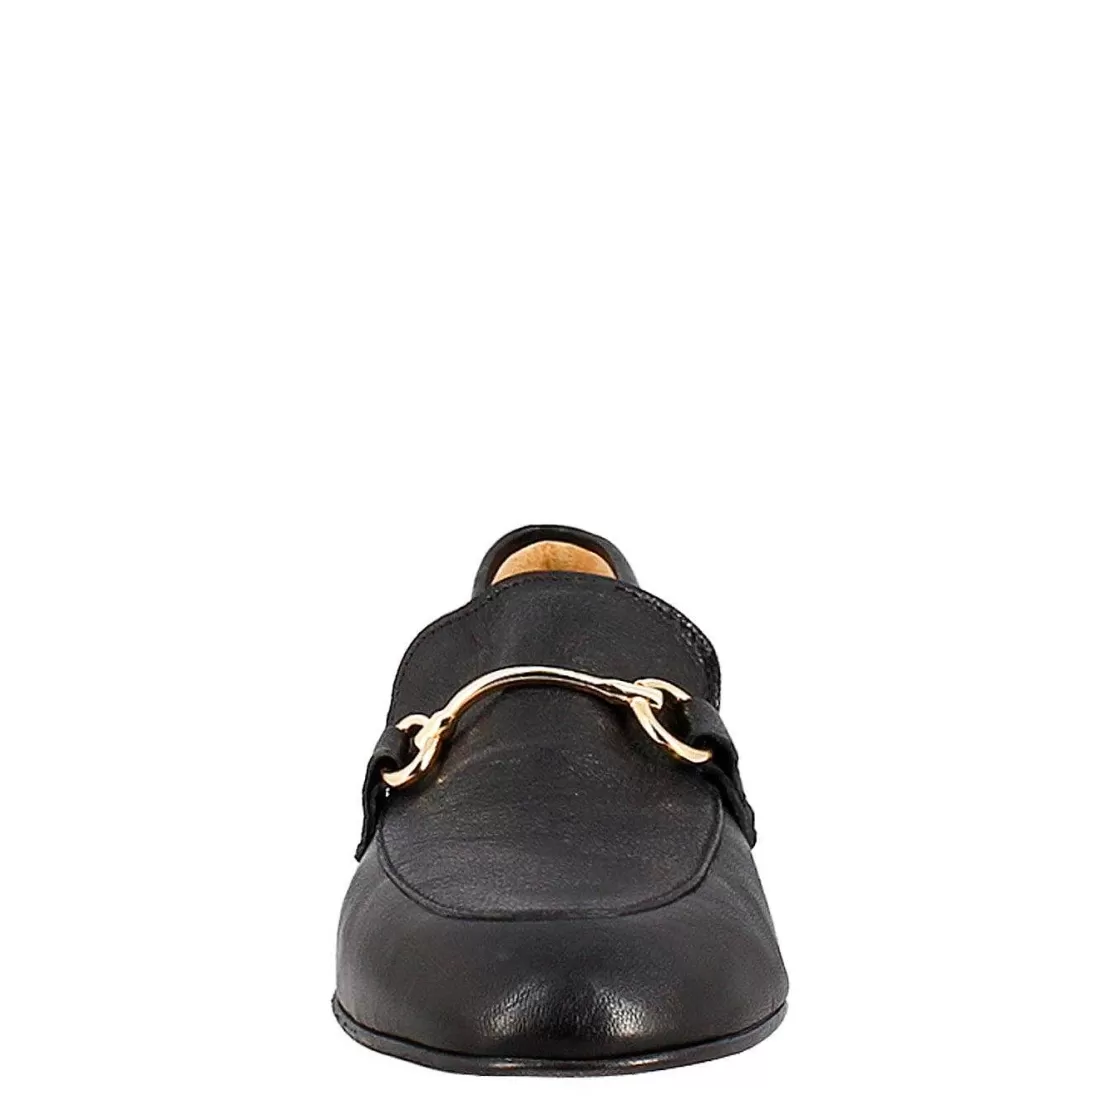 Leonardo Women'S Moccasin In Black Leather With Gold Clamp Online